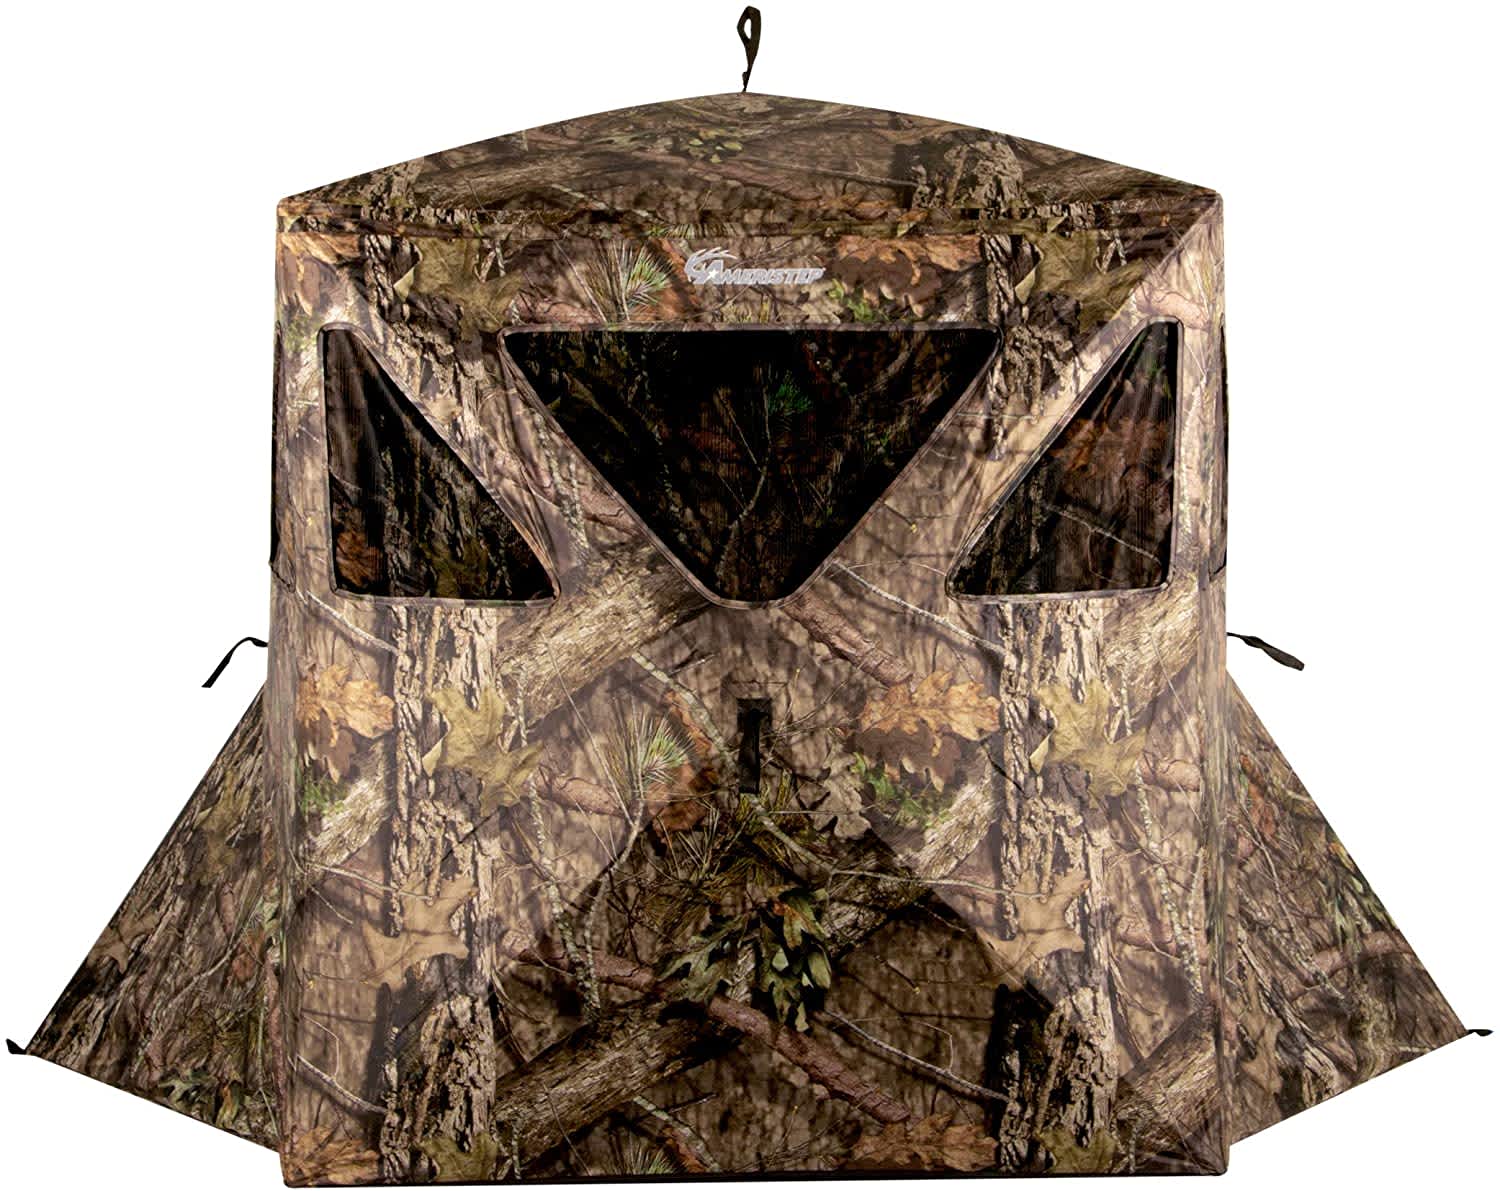 Ameristep Care Taker Kick Out Pop-Up Ground Blind - Save an Additional 20%